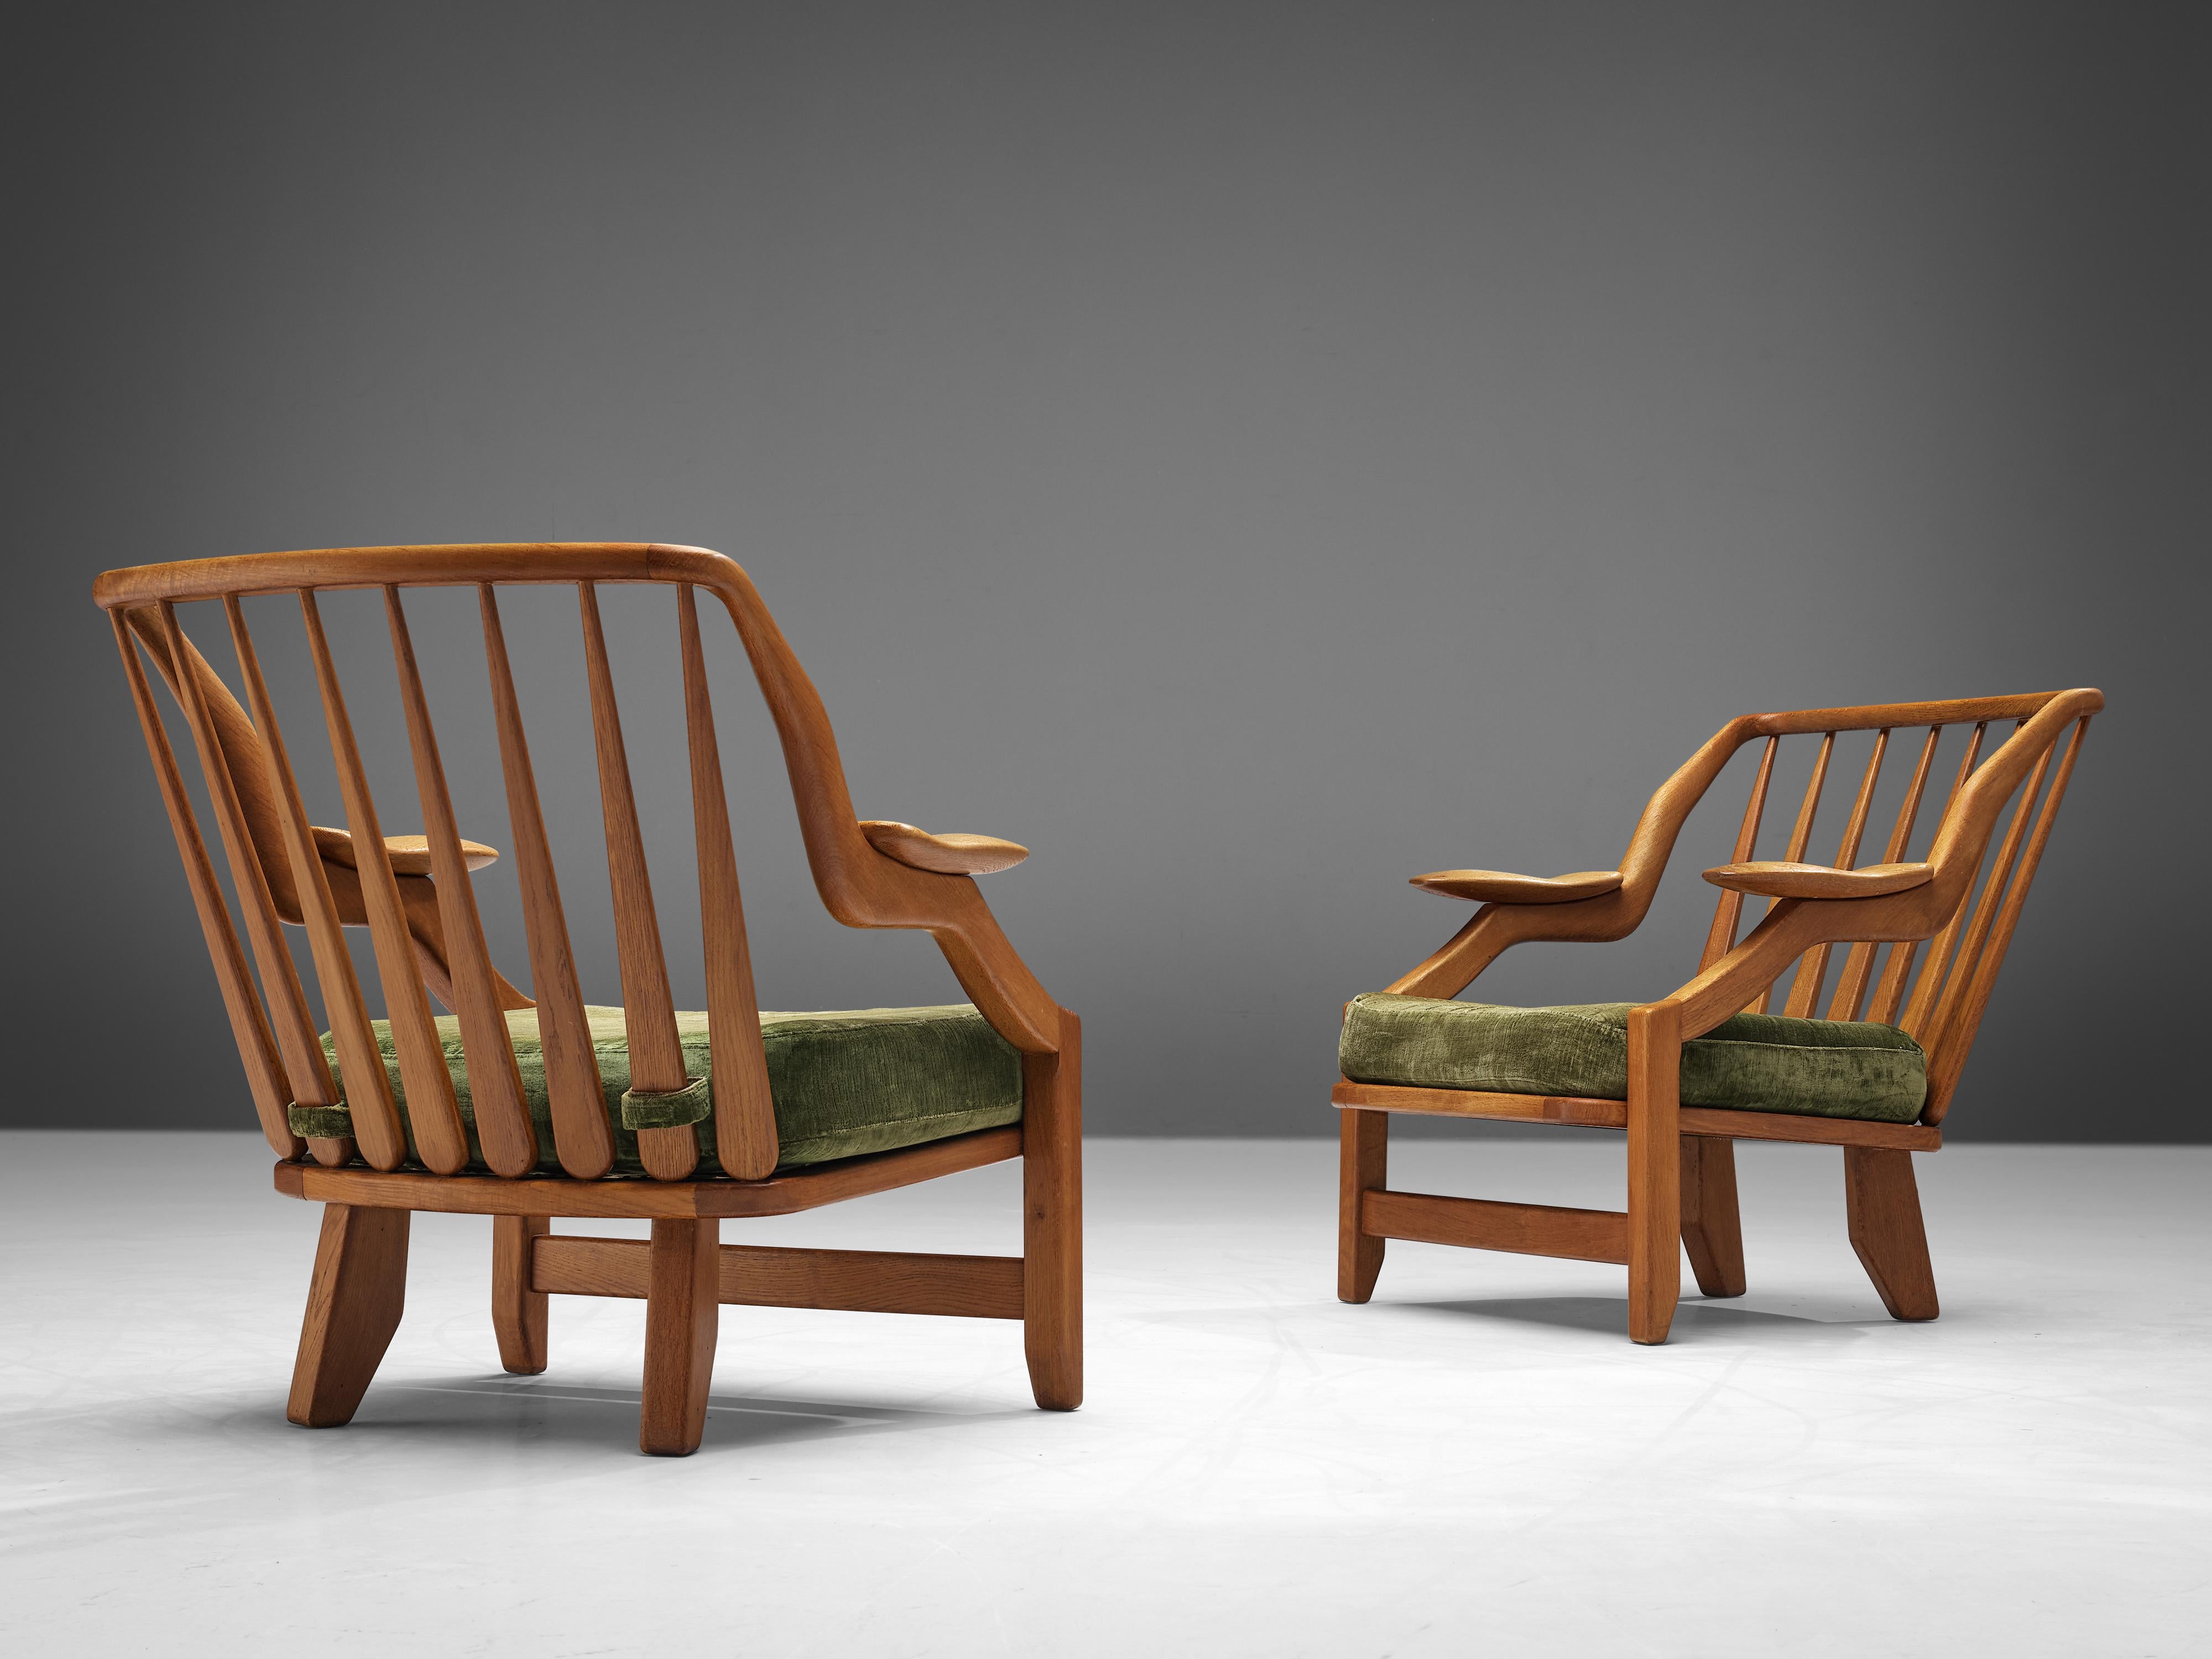 Guillerme & Chambron for Votre Maison, pair of lounge chairs model 'Gregoire', oak, velvet, France 1960s.

The French designer duo is known for their extreme high-quality solid oak furniture, from which this pair is another great example. These